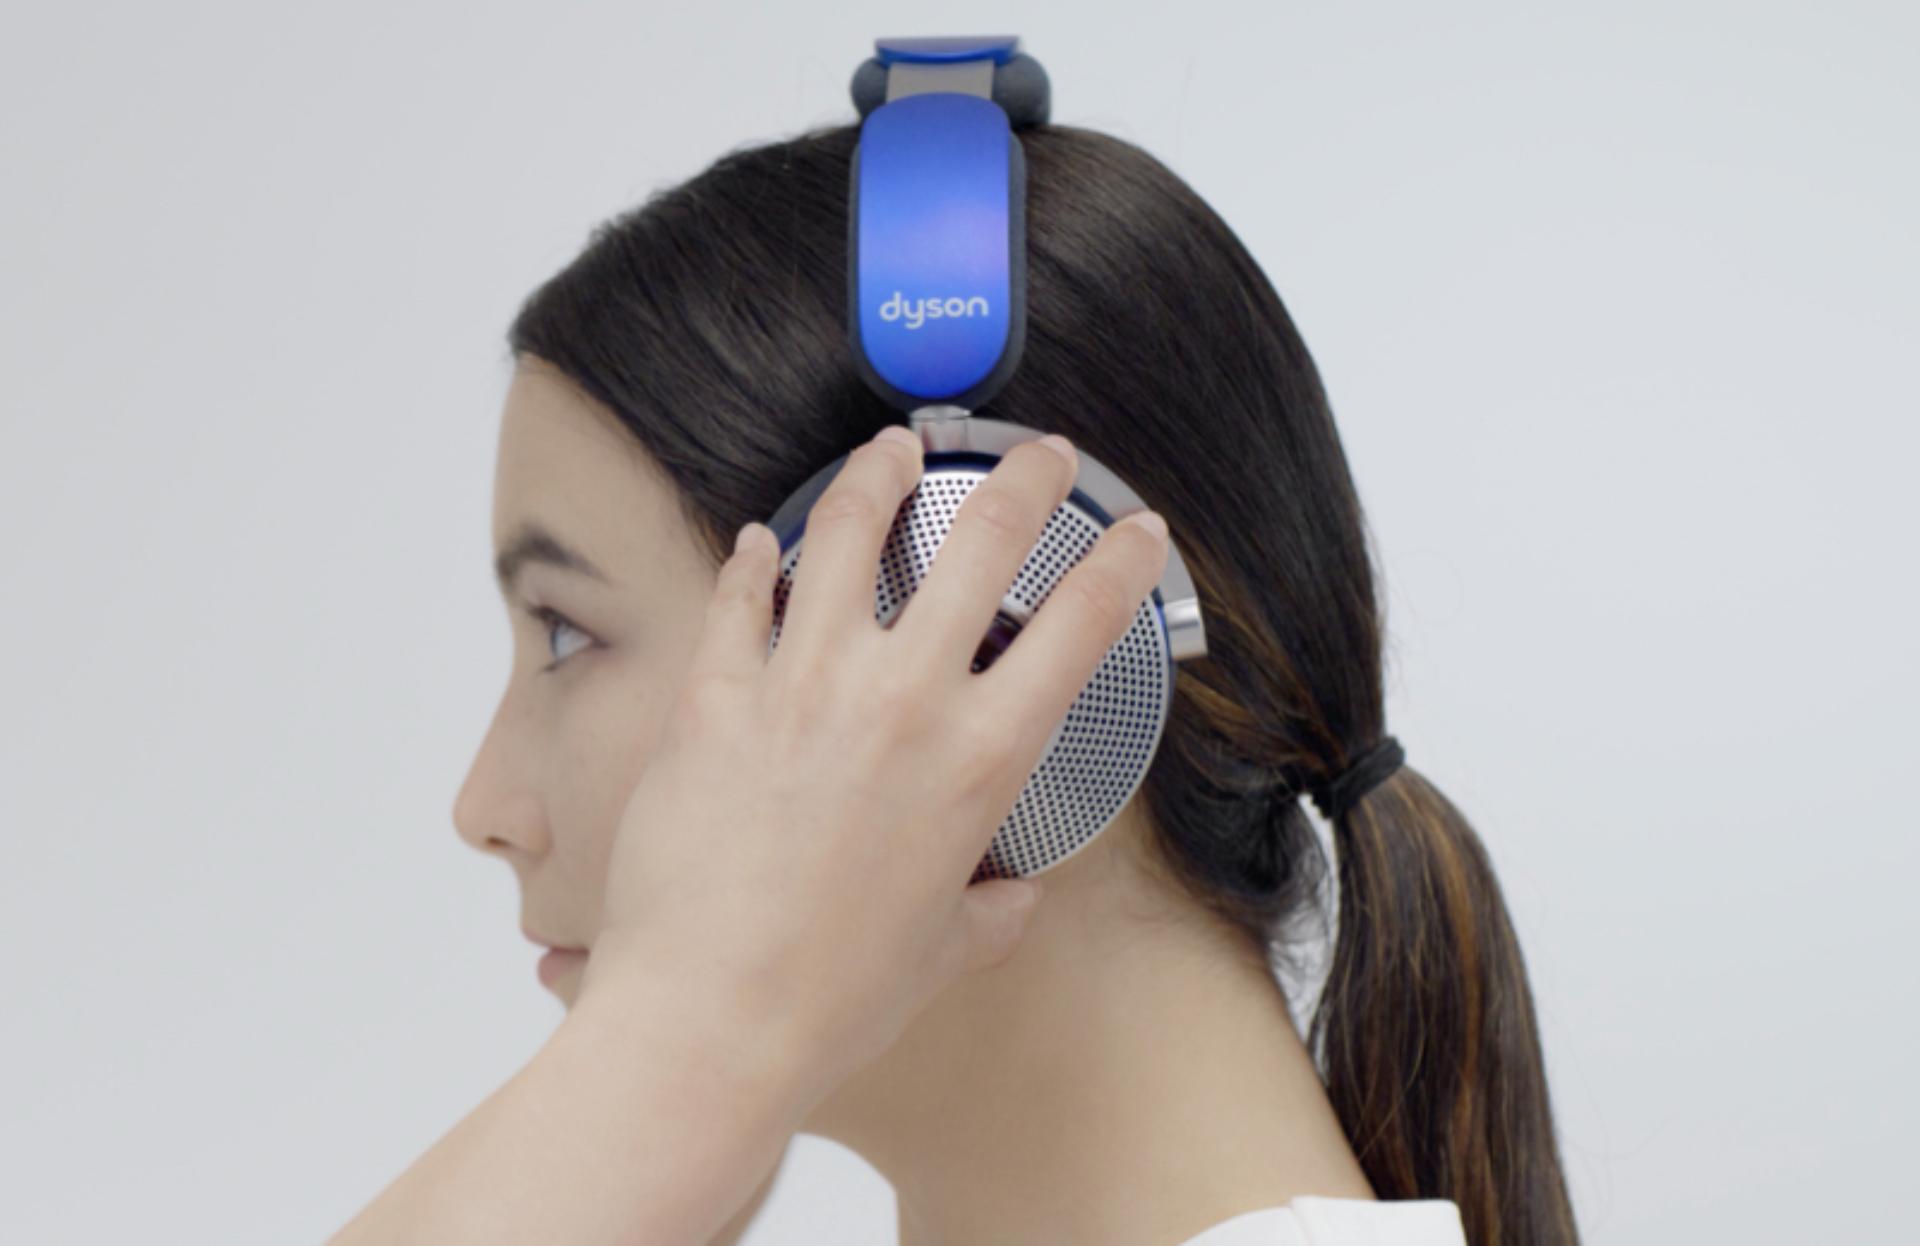 Side view of a woman adjusting the Dyson Zone air-purifying headphones on her head.